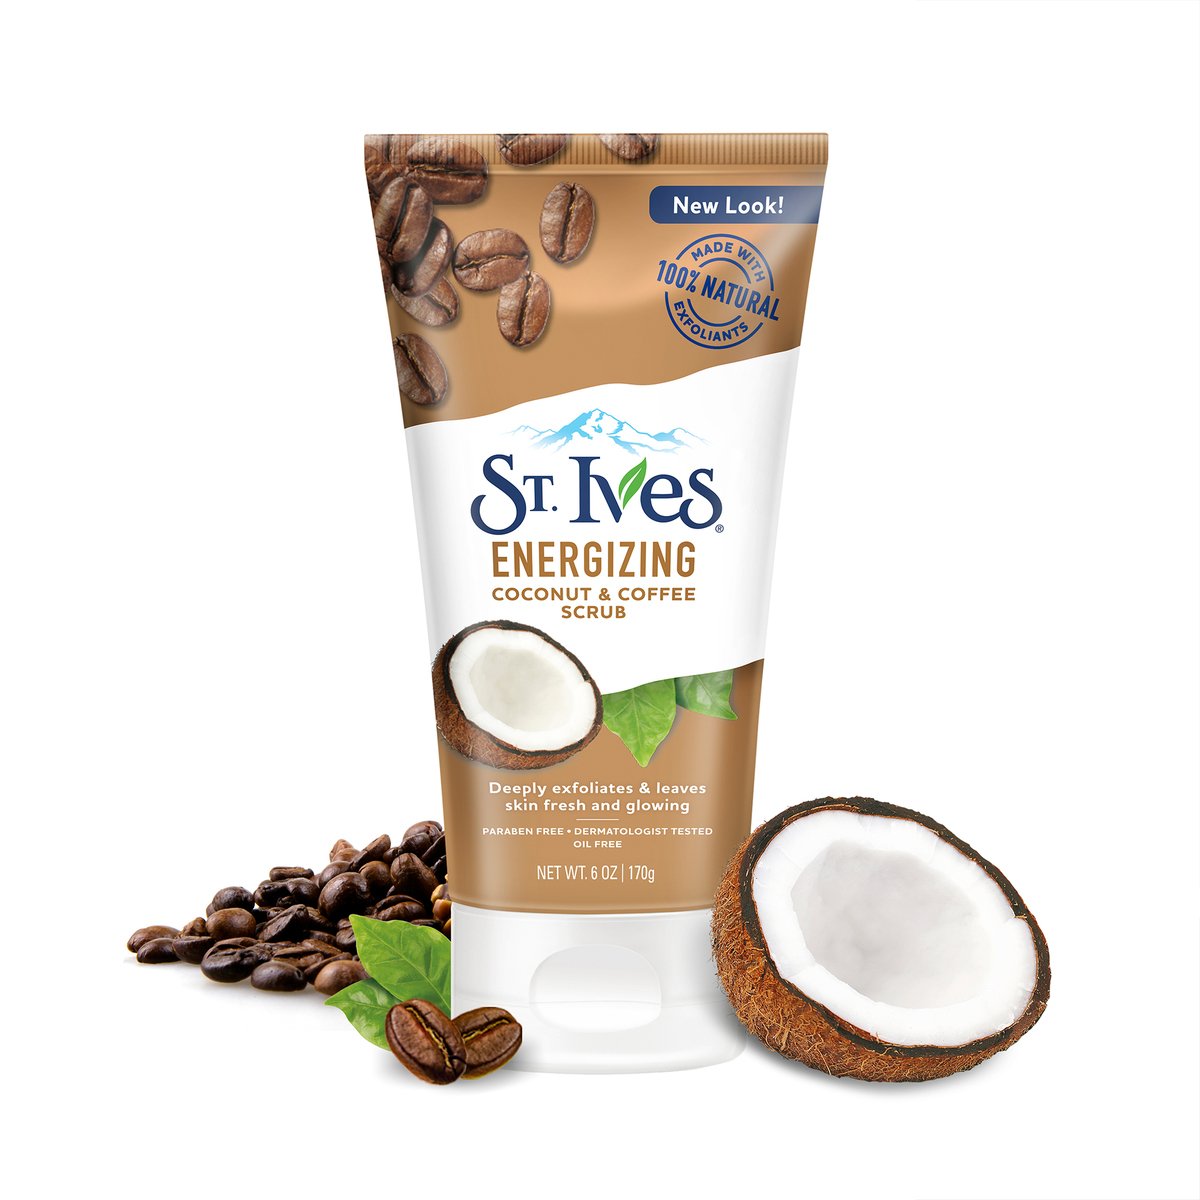 St. Ives Coconut & Coffee Energising Face Scrub 170g